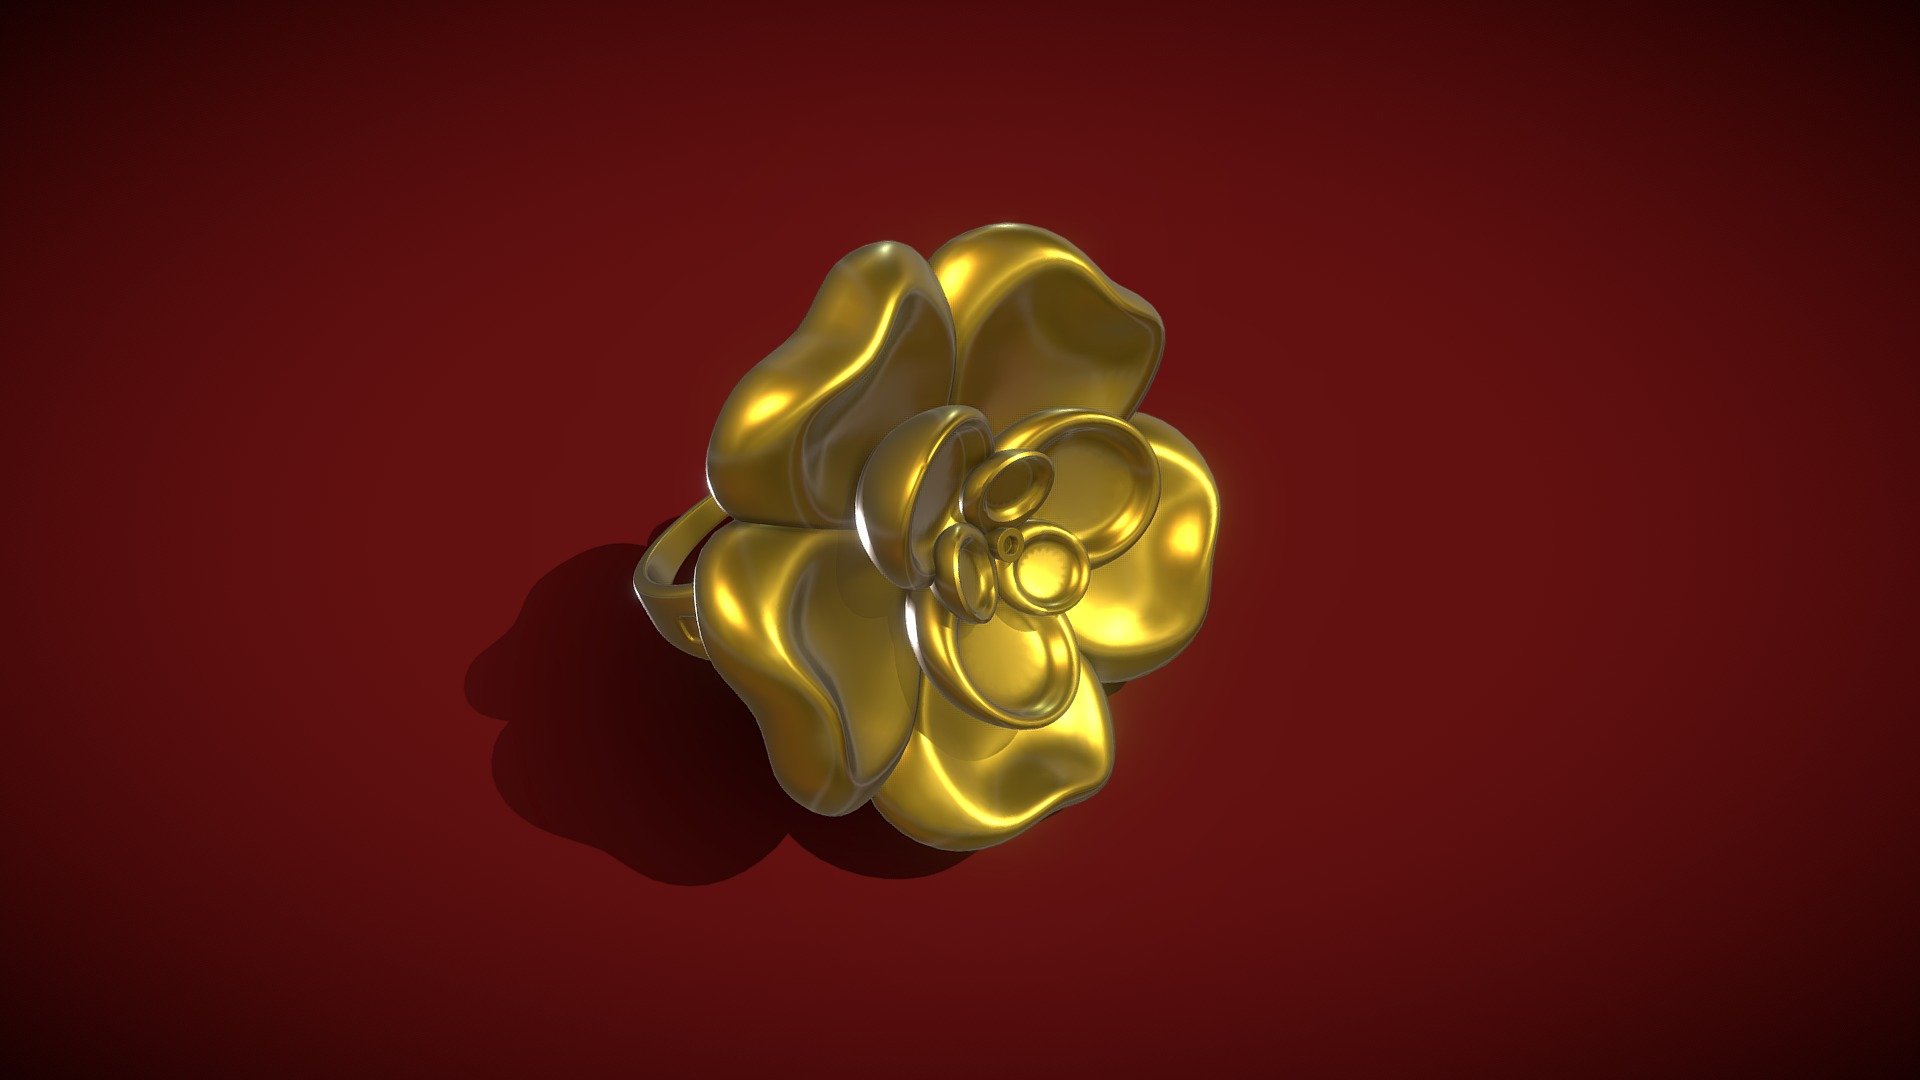 Flower Ring Jewelry Design made in 3ds max and rendered in Keyshot 9.3 pro.
3D Printable Model.

Ring size:-
Ring Diameter = 20mm, Thickness = 1mm, Taper Value = 1.5mm to 5.5mm.
Flower Diameter = 28mm, Height = 8mm.
Polys = 48576 and Verts = 48600 3d model